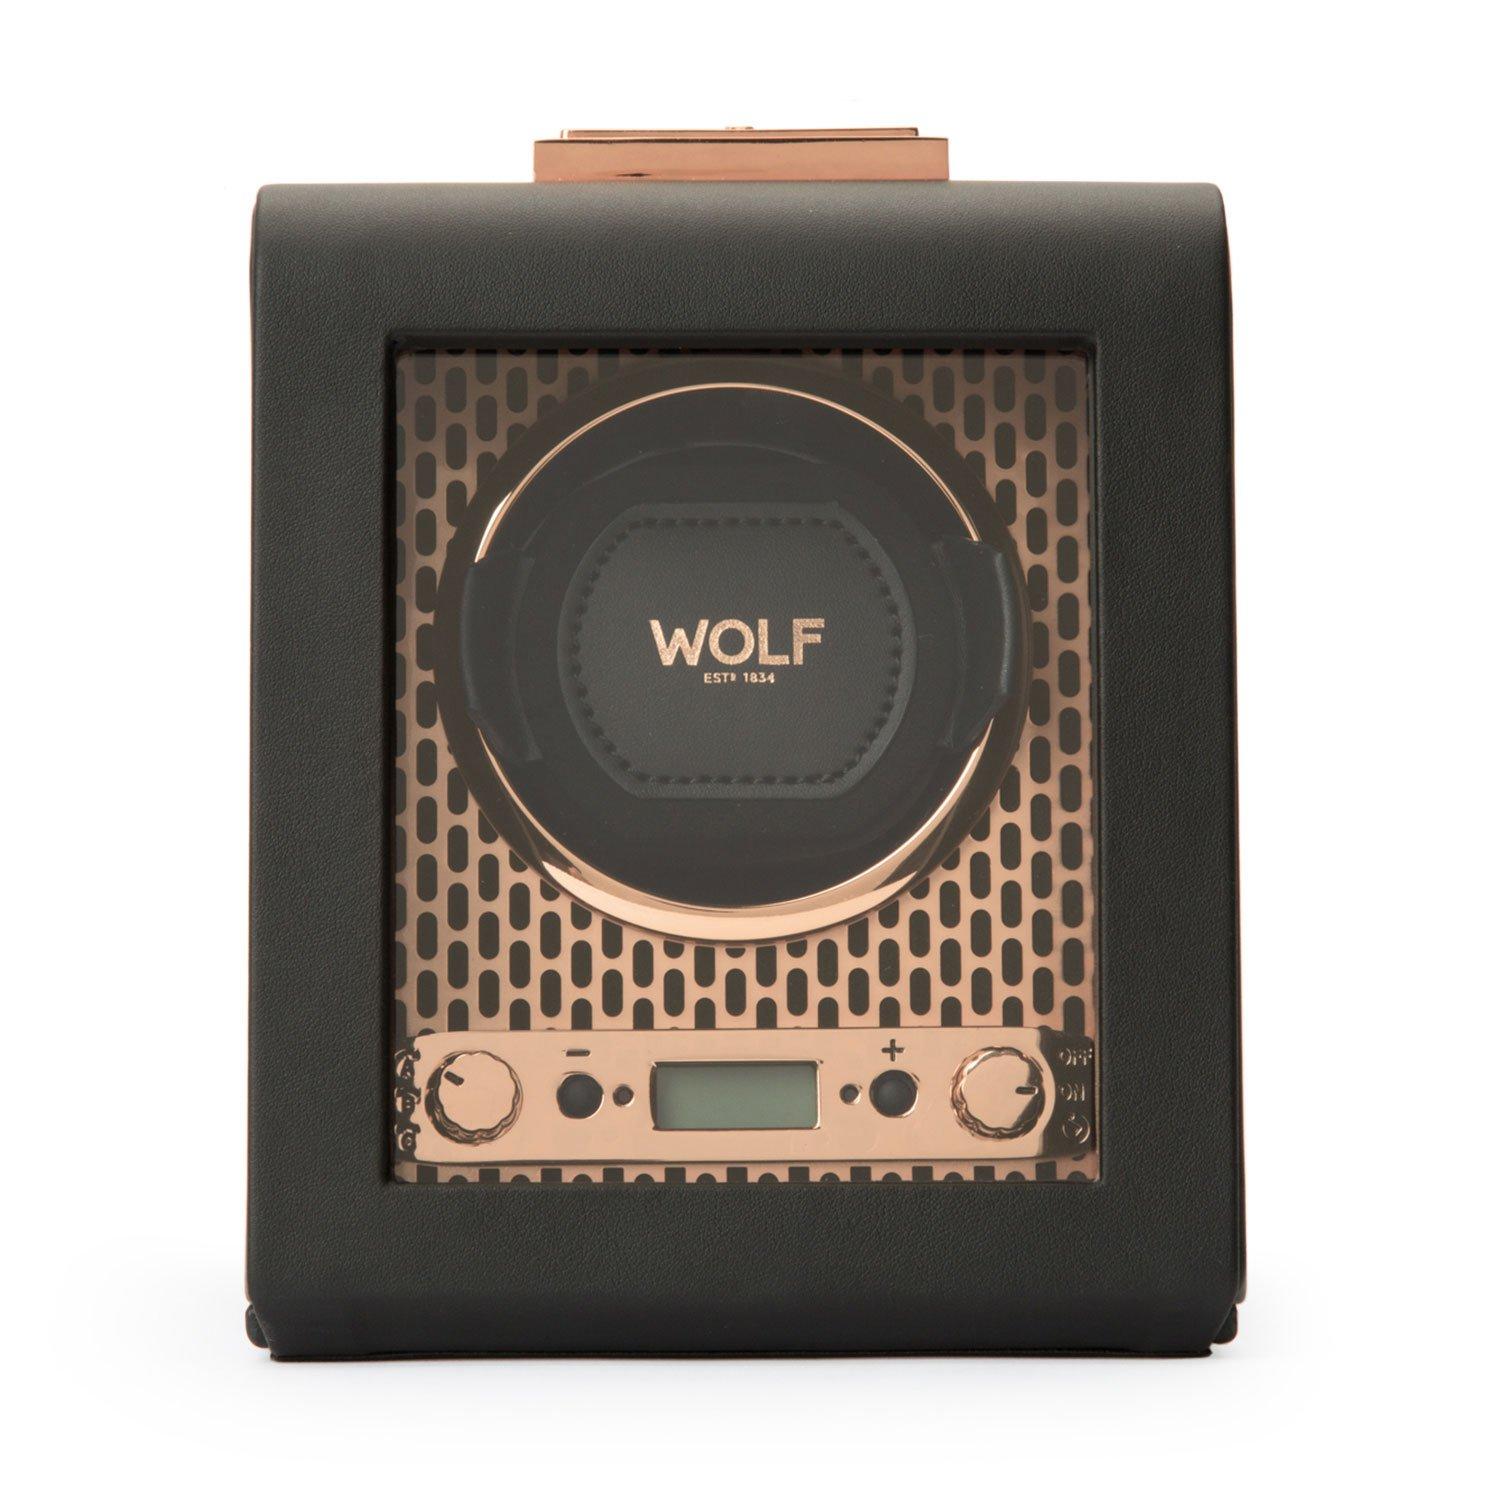 wolfaxis rose single watch winder